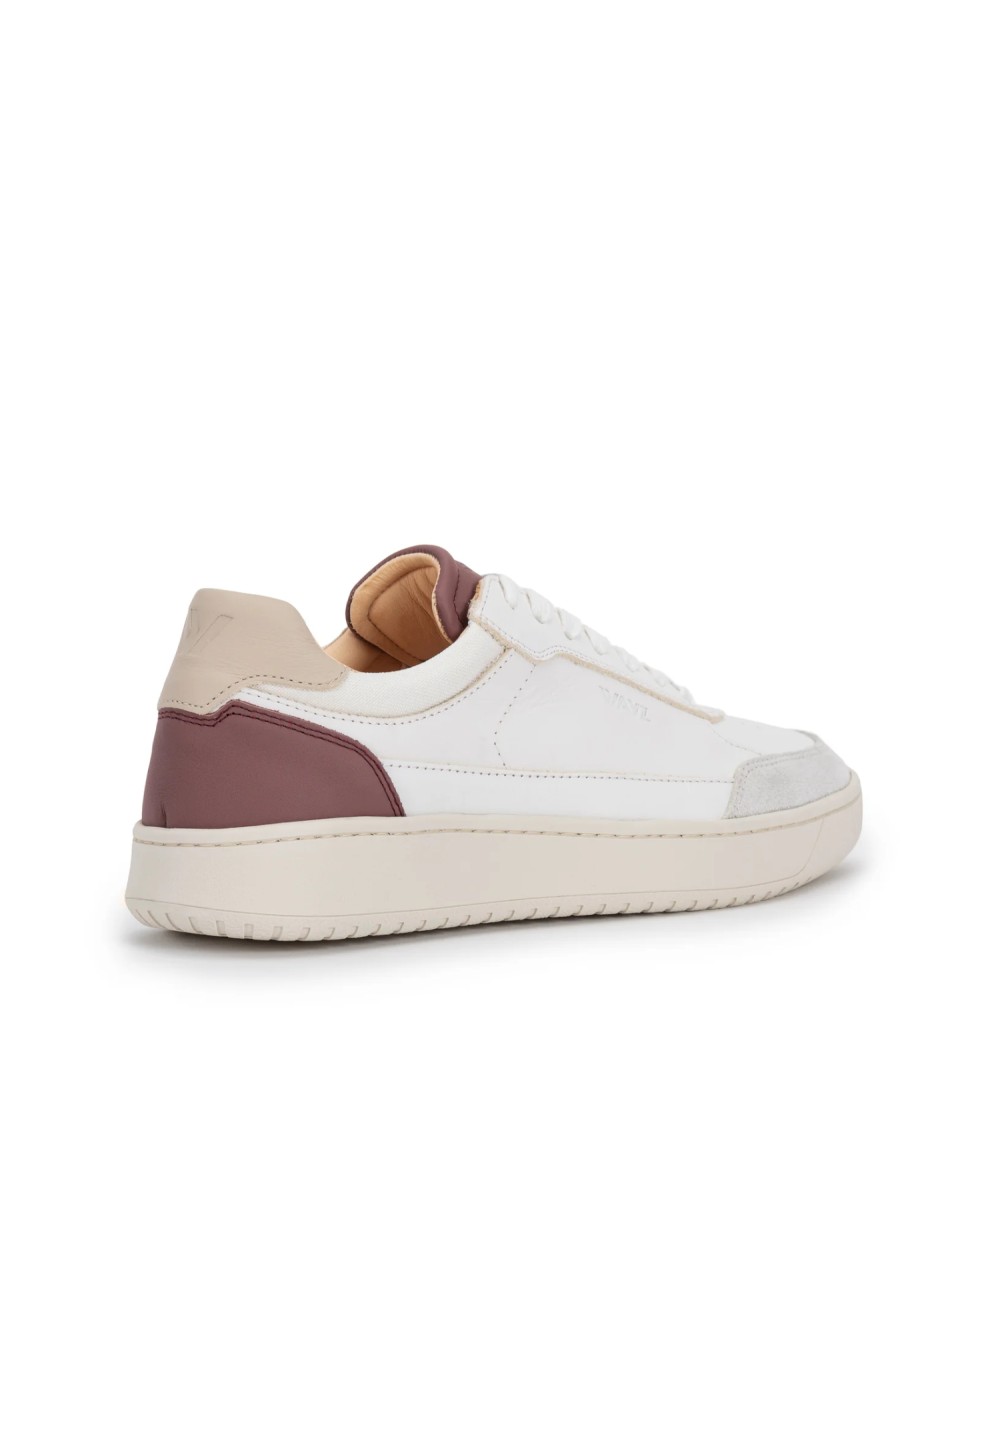 Wayz - Sneaker The Hedonist White Grey Double Dry Rose